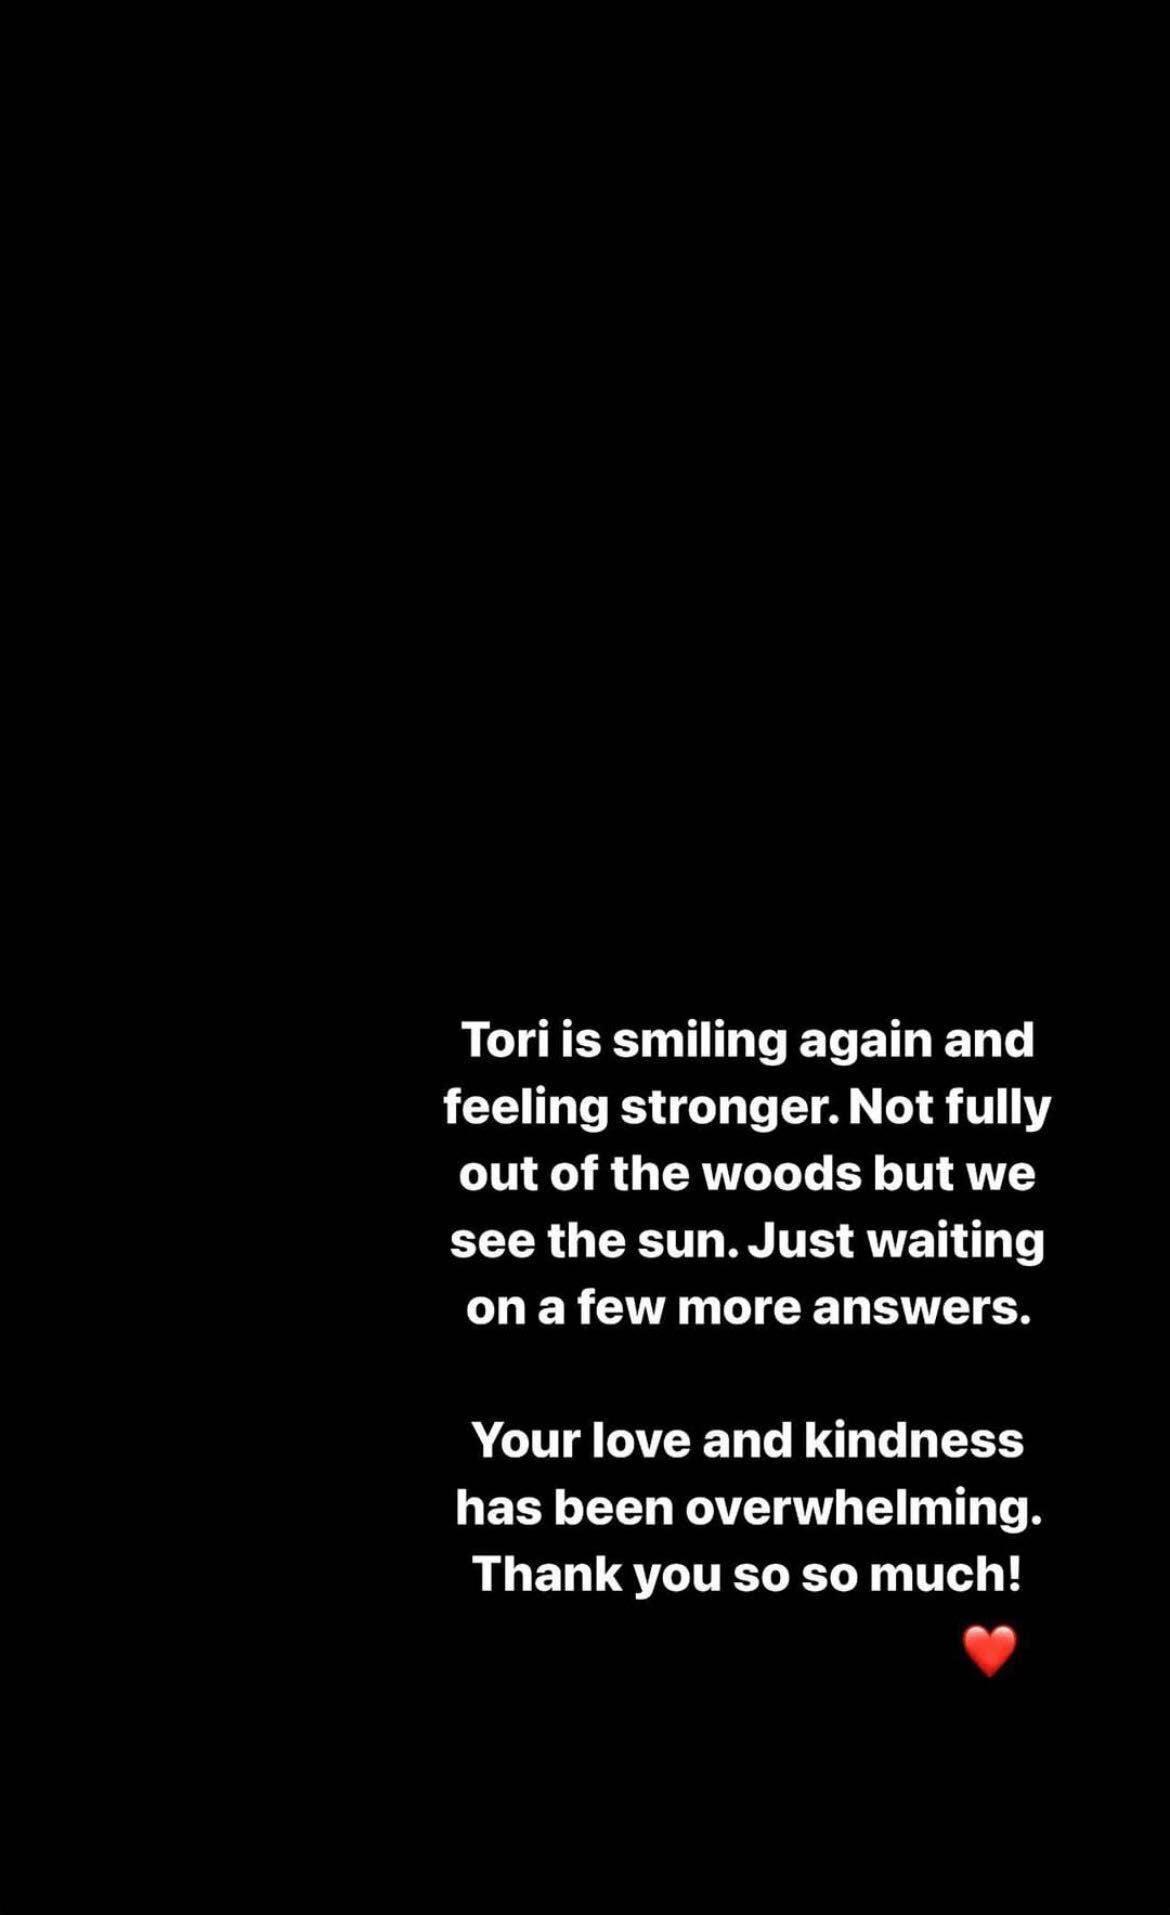 tori kellys husbands post on social media about her health scare and recovery